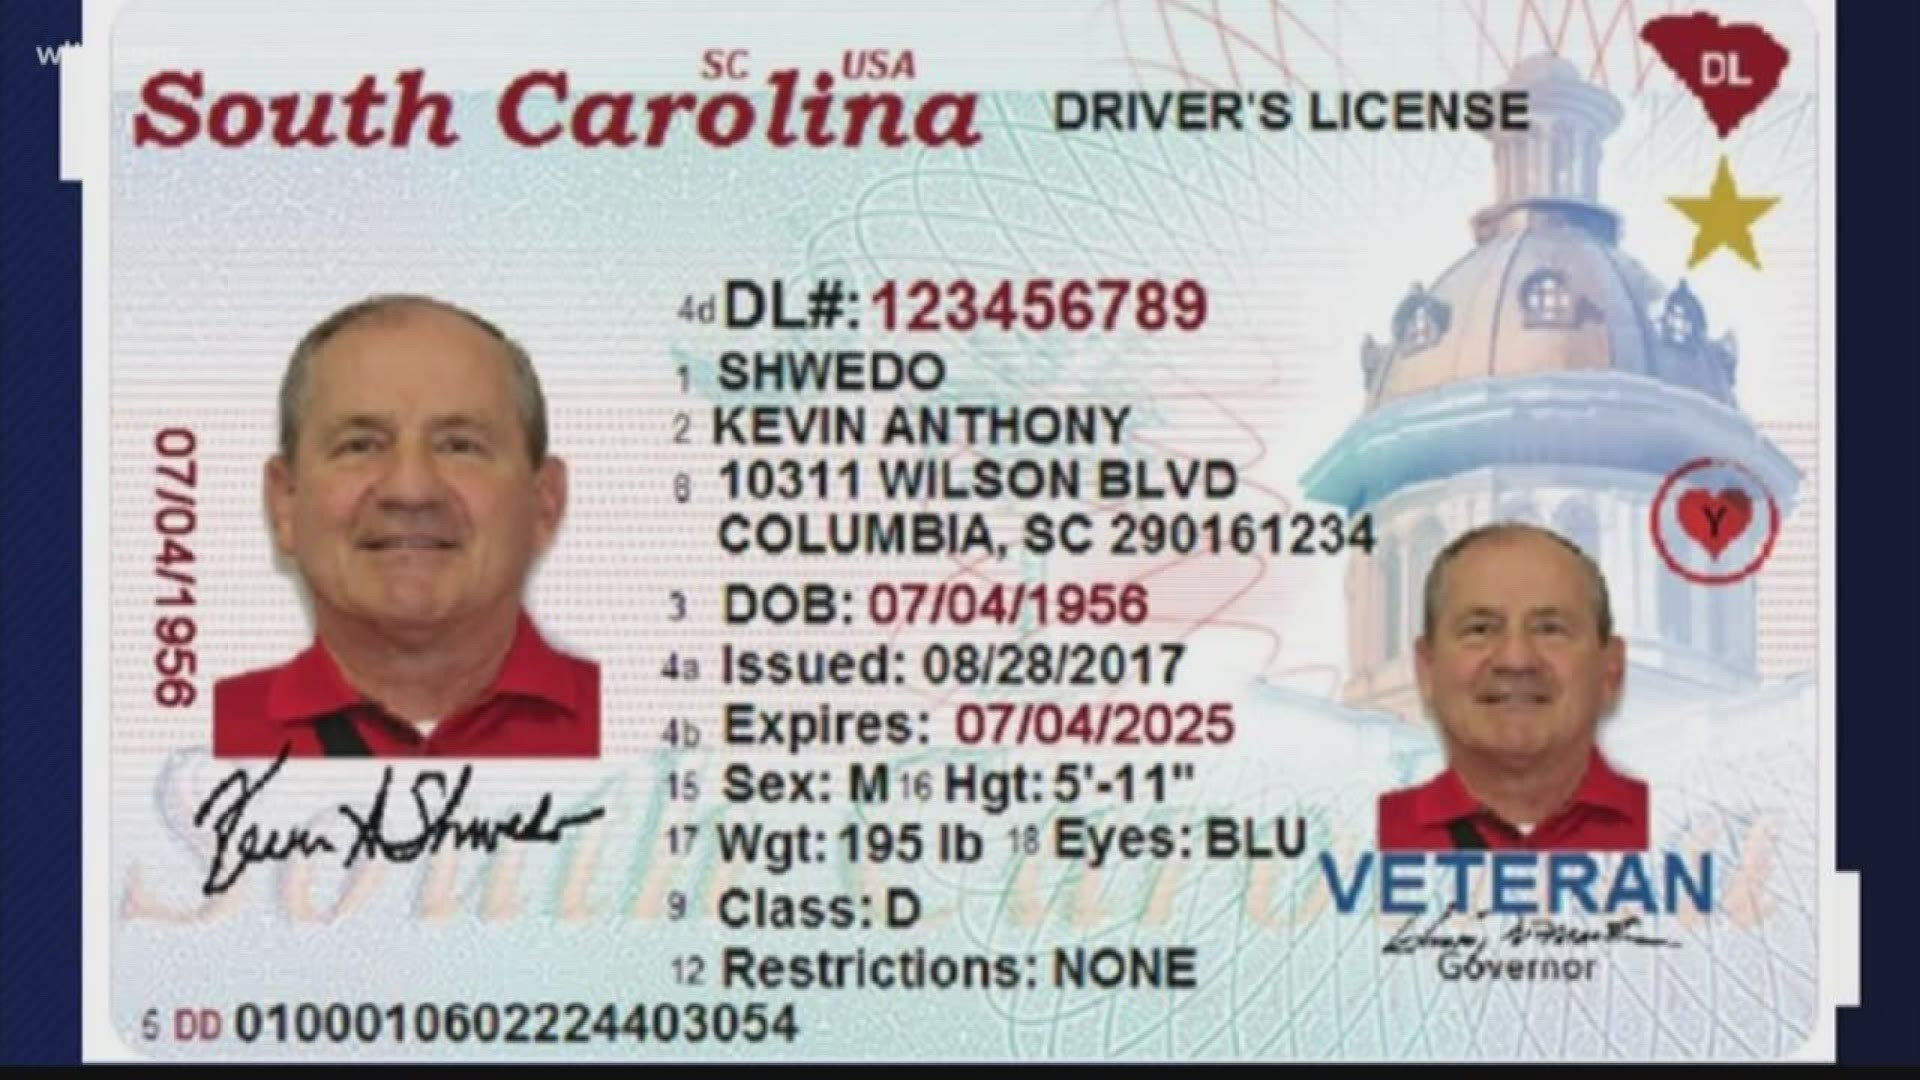 REAL ID Act: Requirements, State Deadlines & Updates [2023]